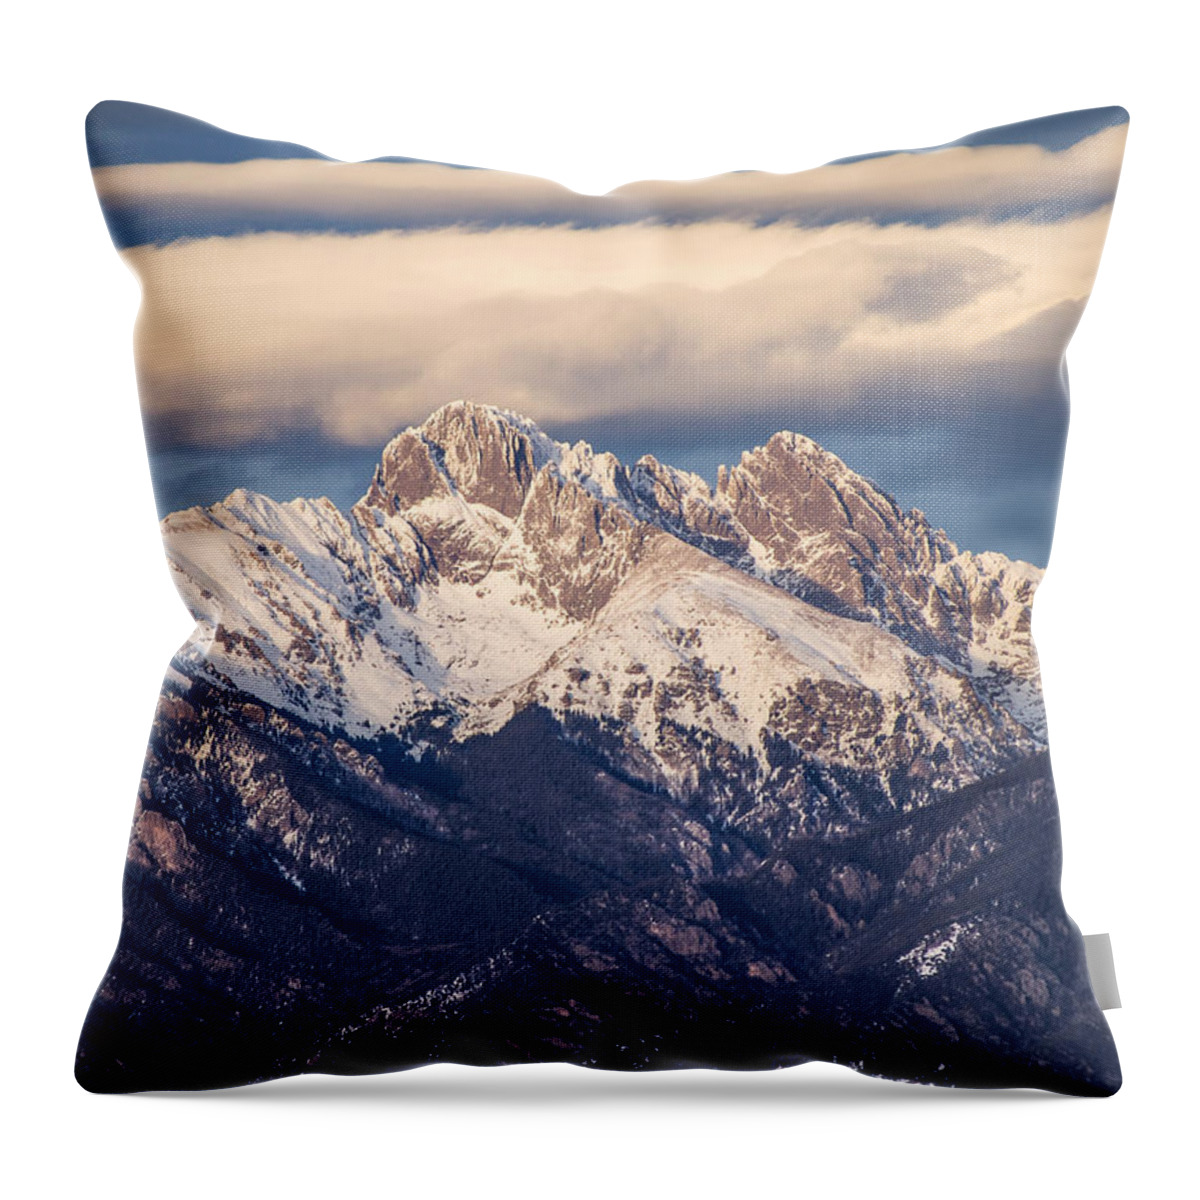 Crestones Throw Pillow featuring the photograph The Crestones by Aaron Spong